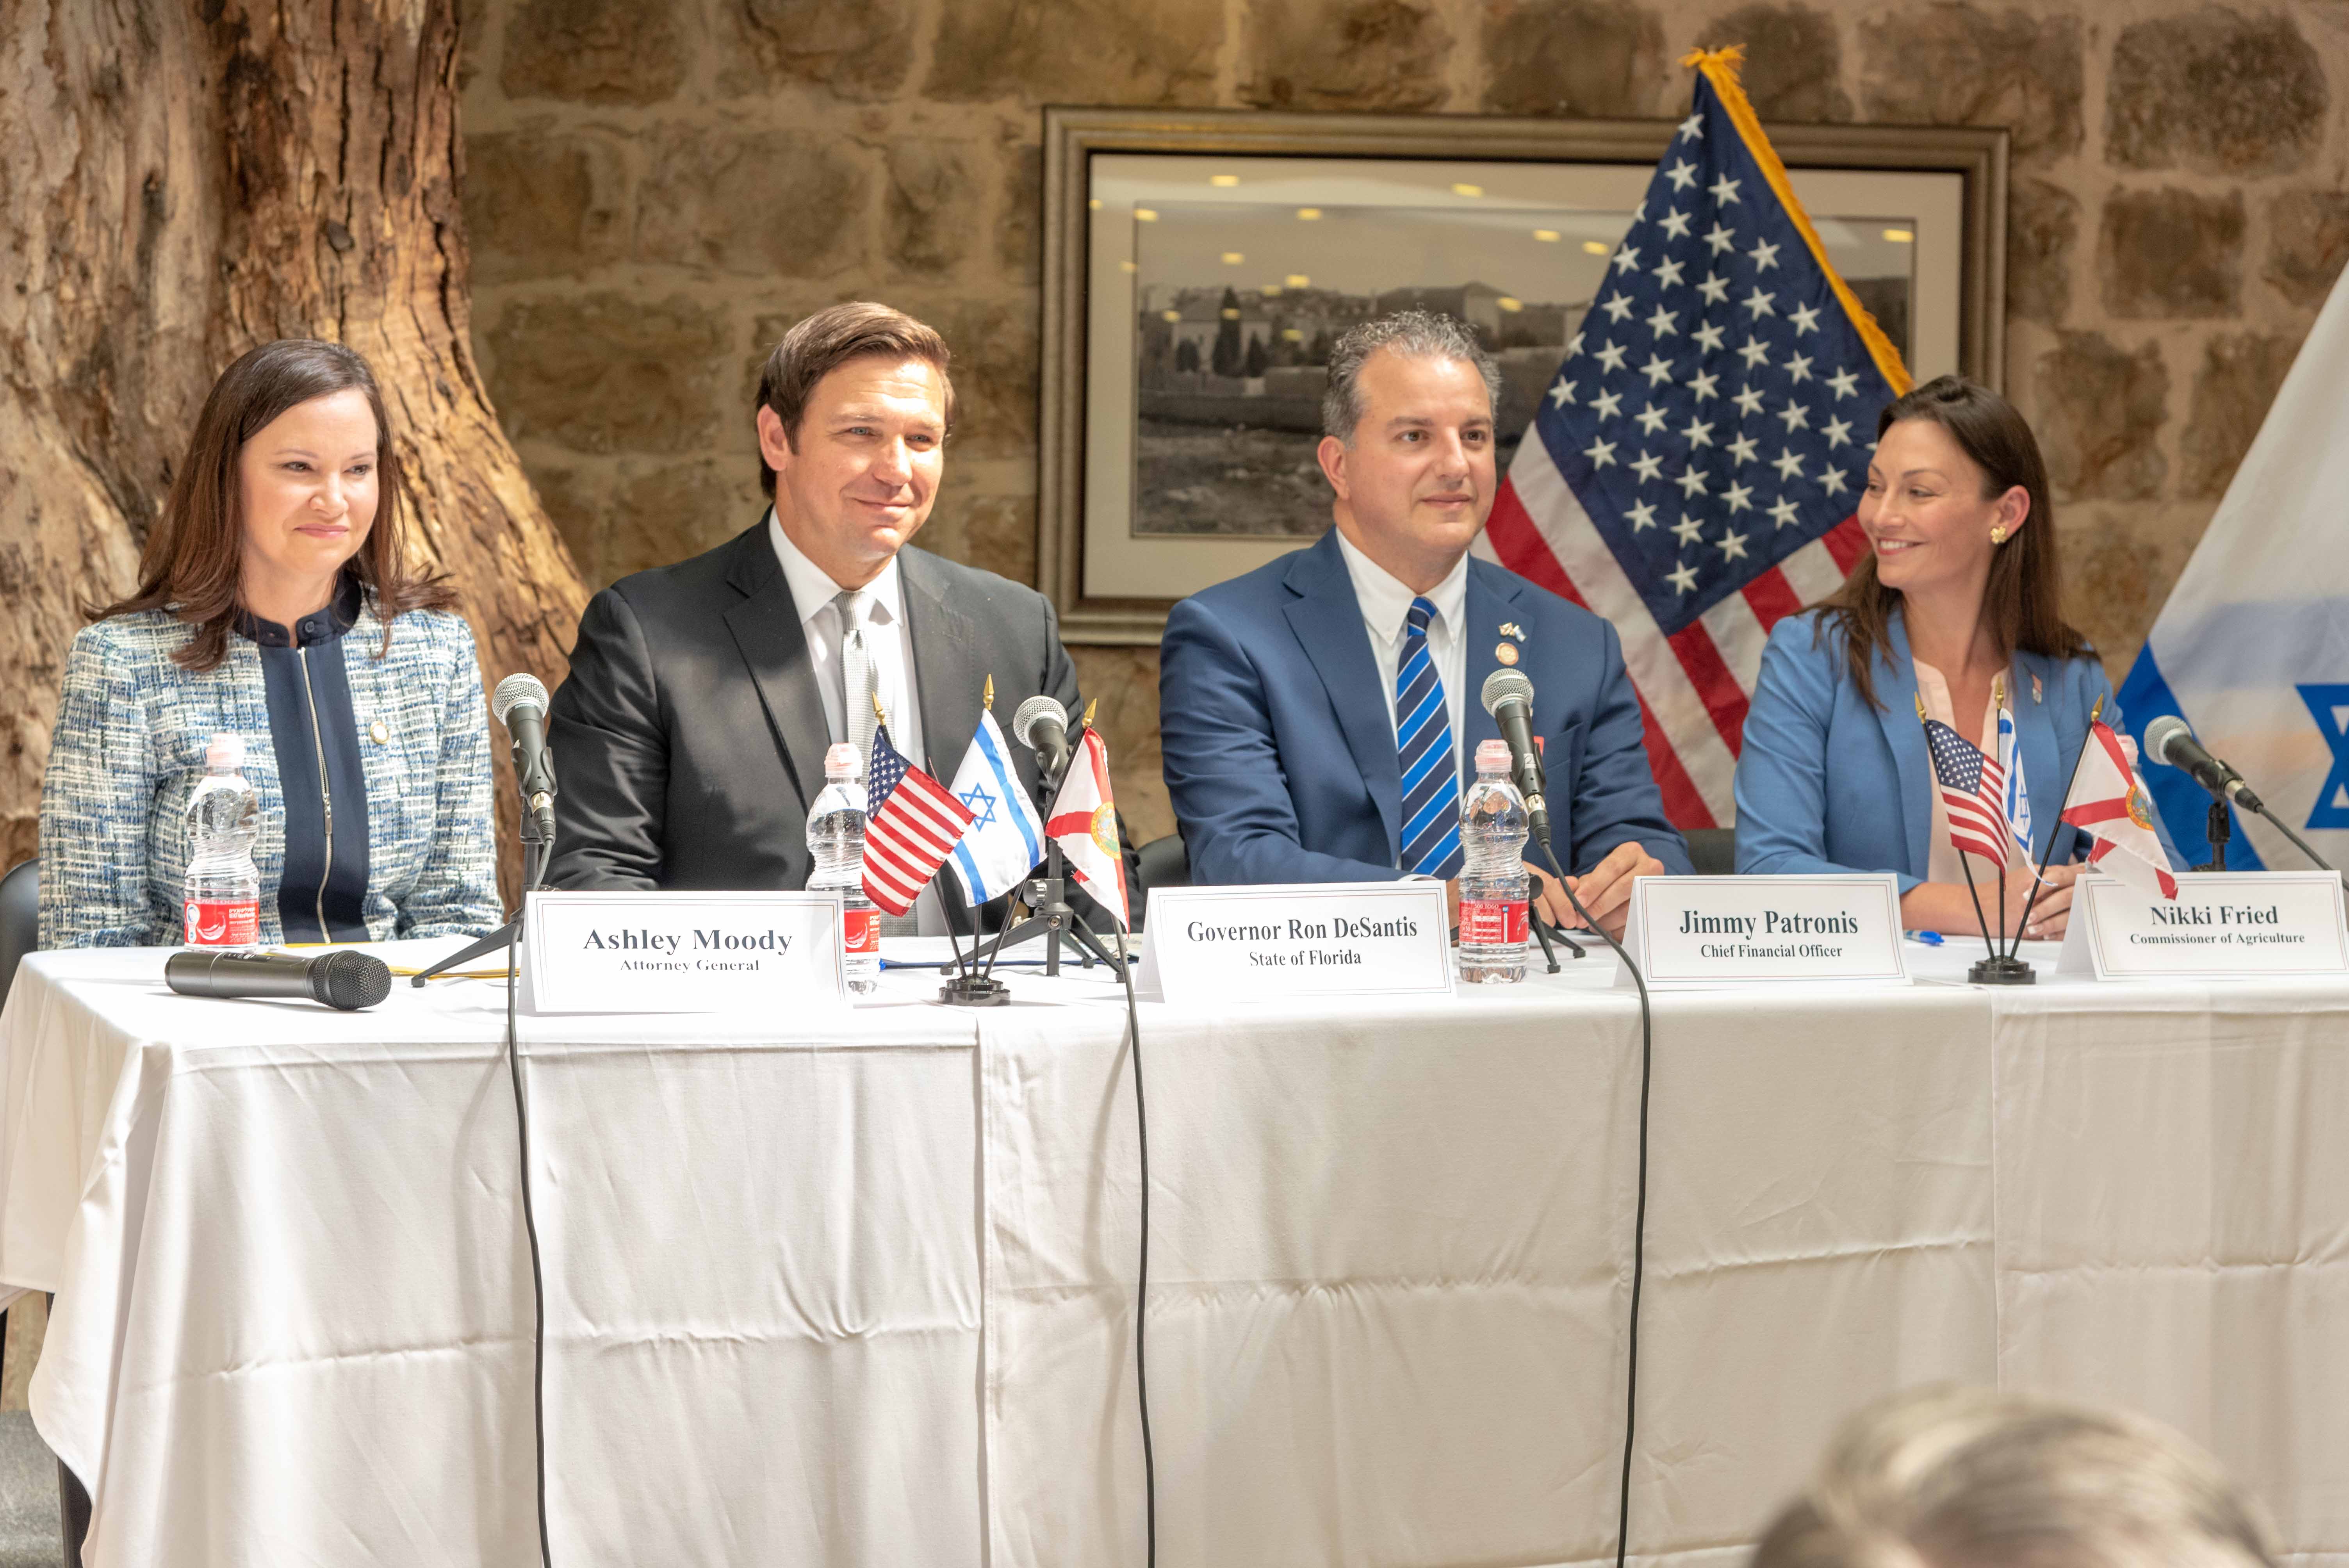   Governor Ron DeSantis Leads Historic Ceremonial Meeting with Florida Cabinet Members at the U.S. Embassy in Jerusalem